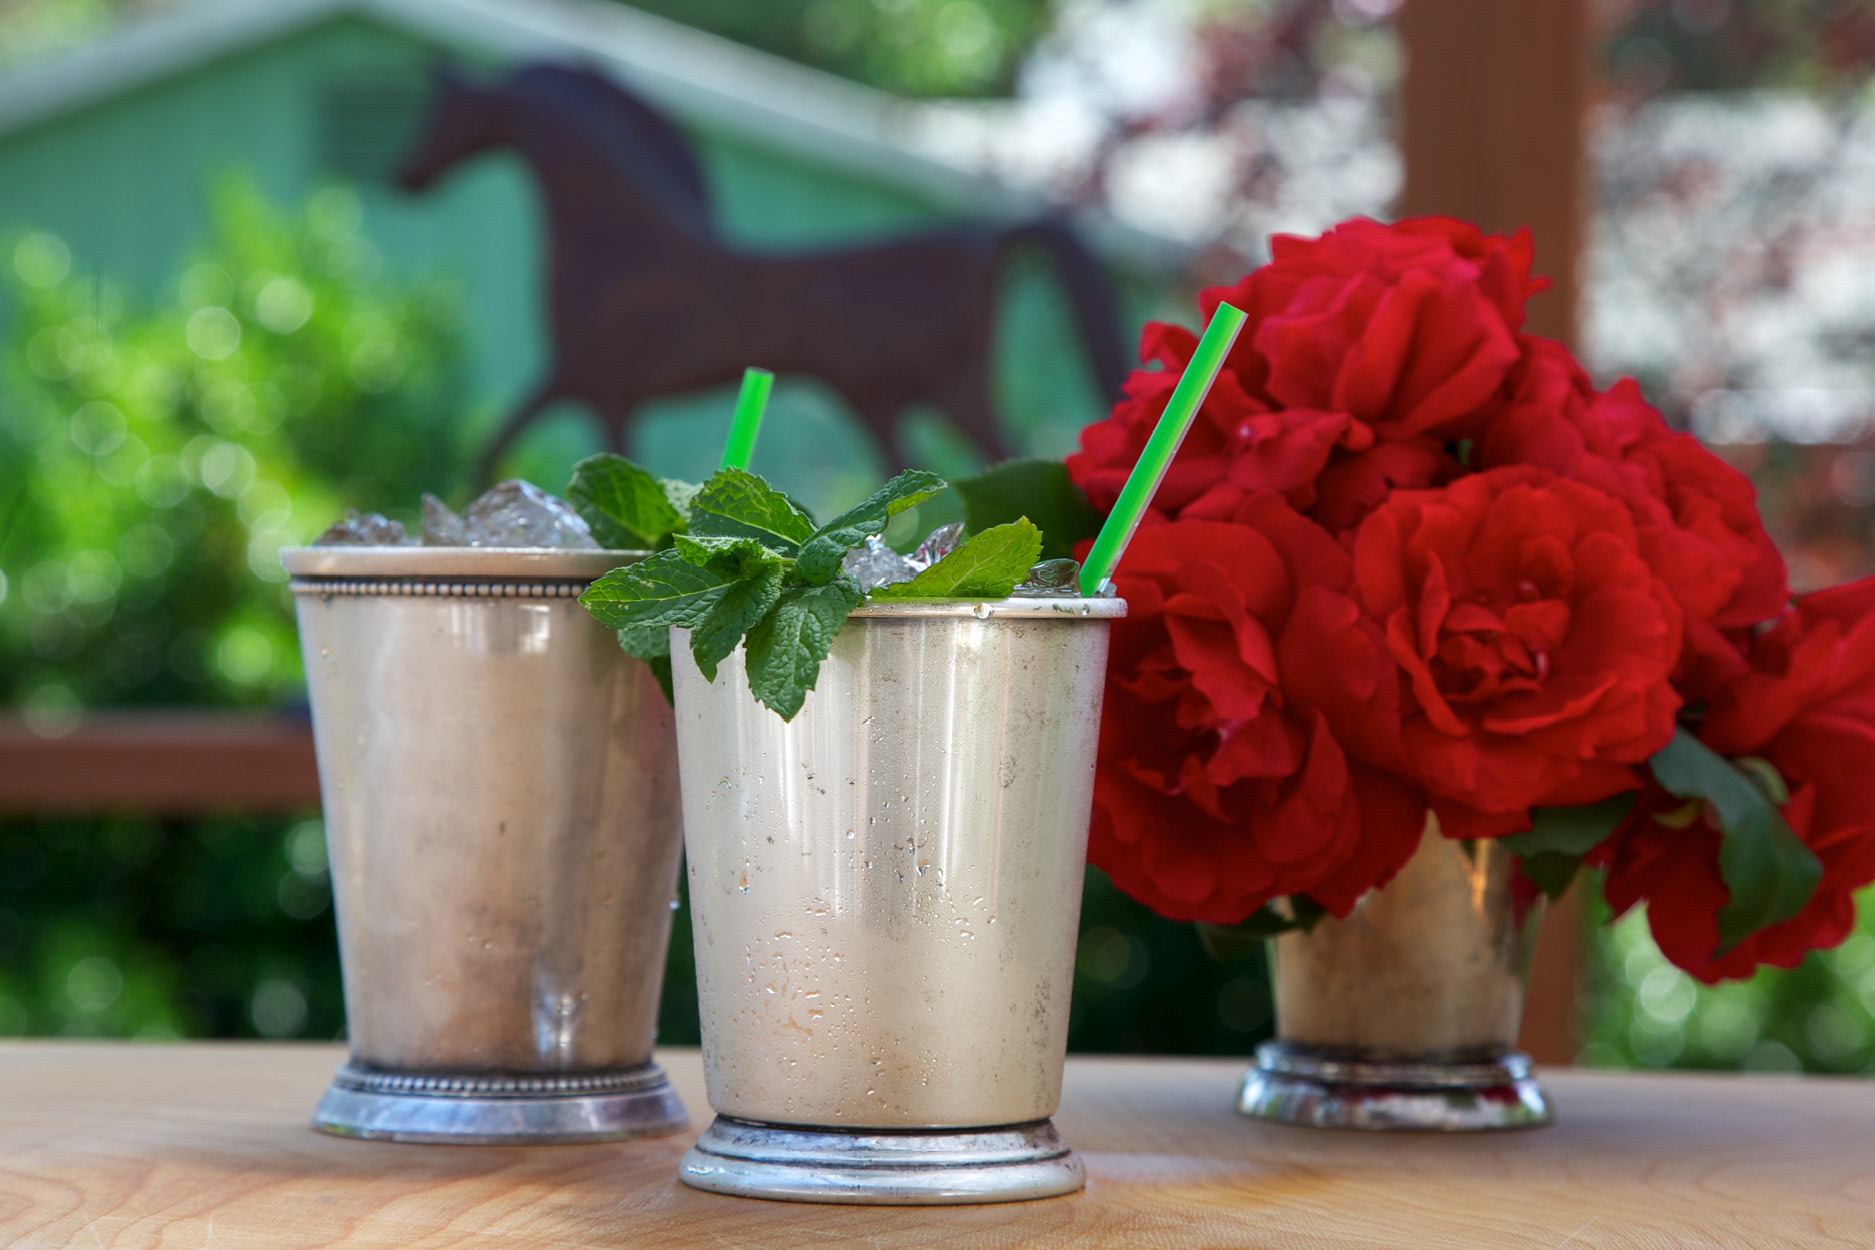 Mint Julep and roses